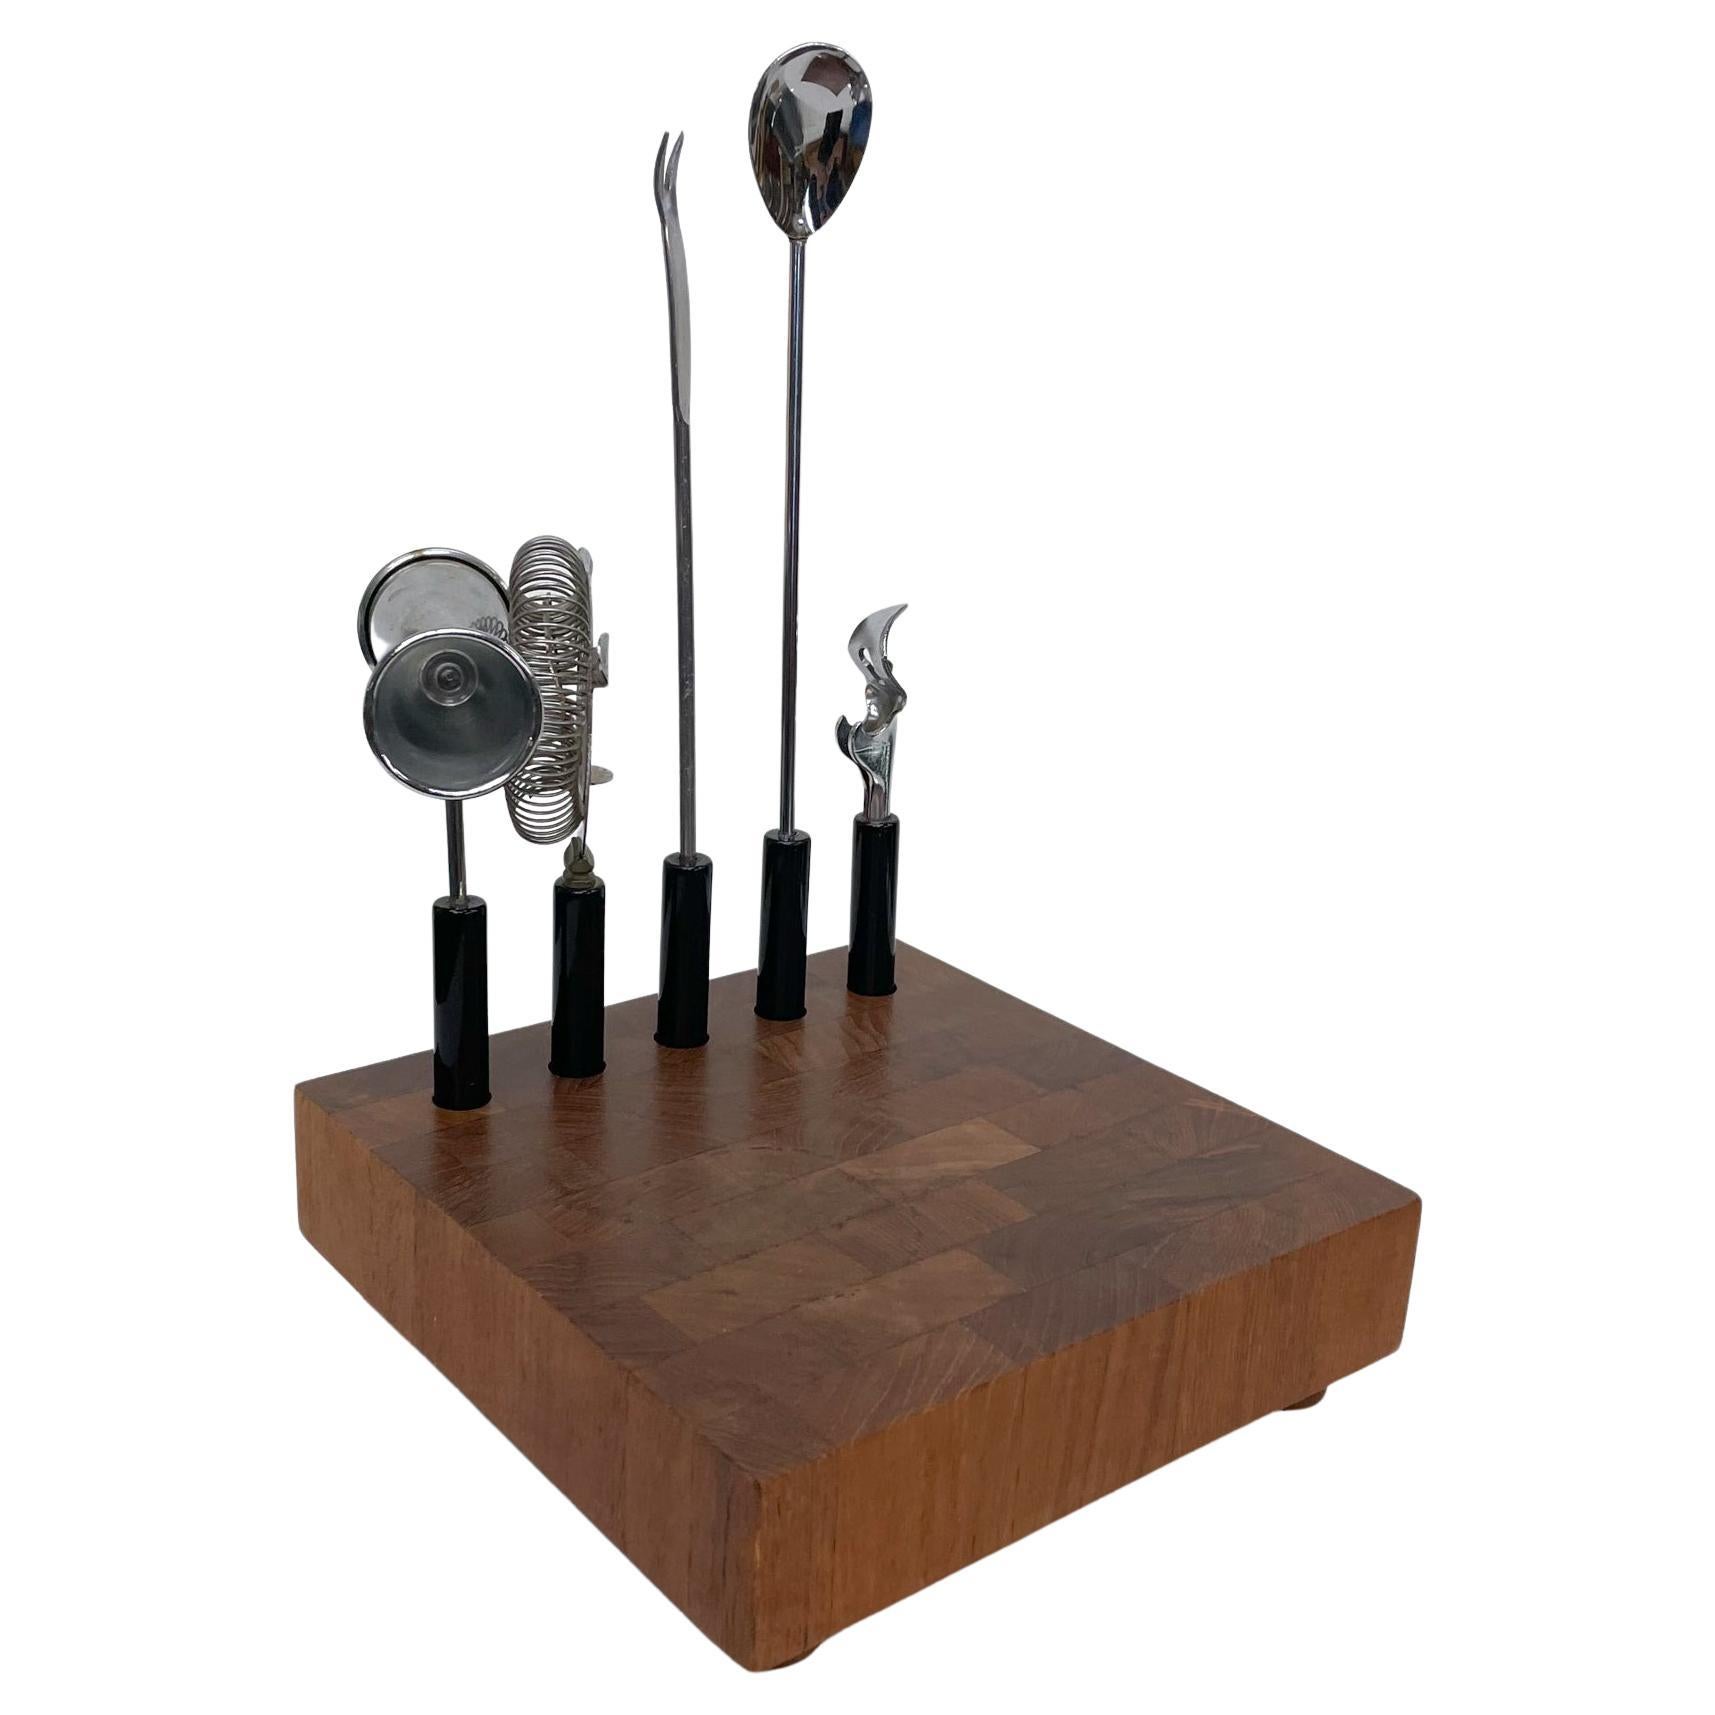 Modern cocktail bar tool set ATAPCO Hong Kong
Teak wood base 8 x 8 x 2.25 H with tools, 12.5 inches
Handcrafted staved teak board, maker signed at the bottom. 
Black plastic handles with chrome plated steel.
Includes 5 cocktail barware tools on